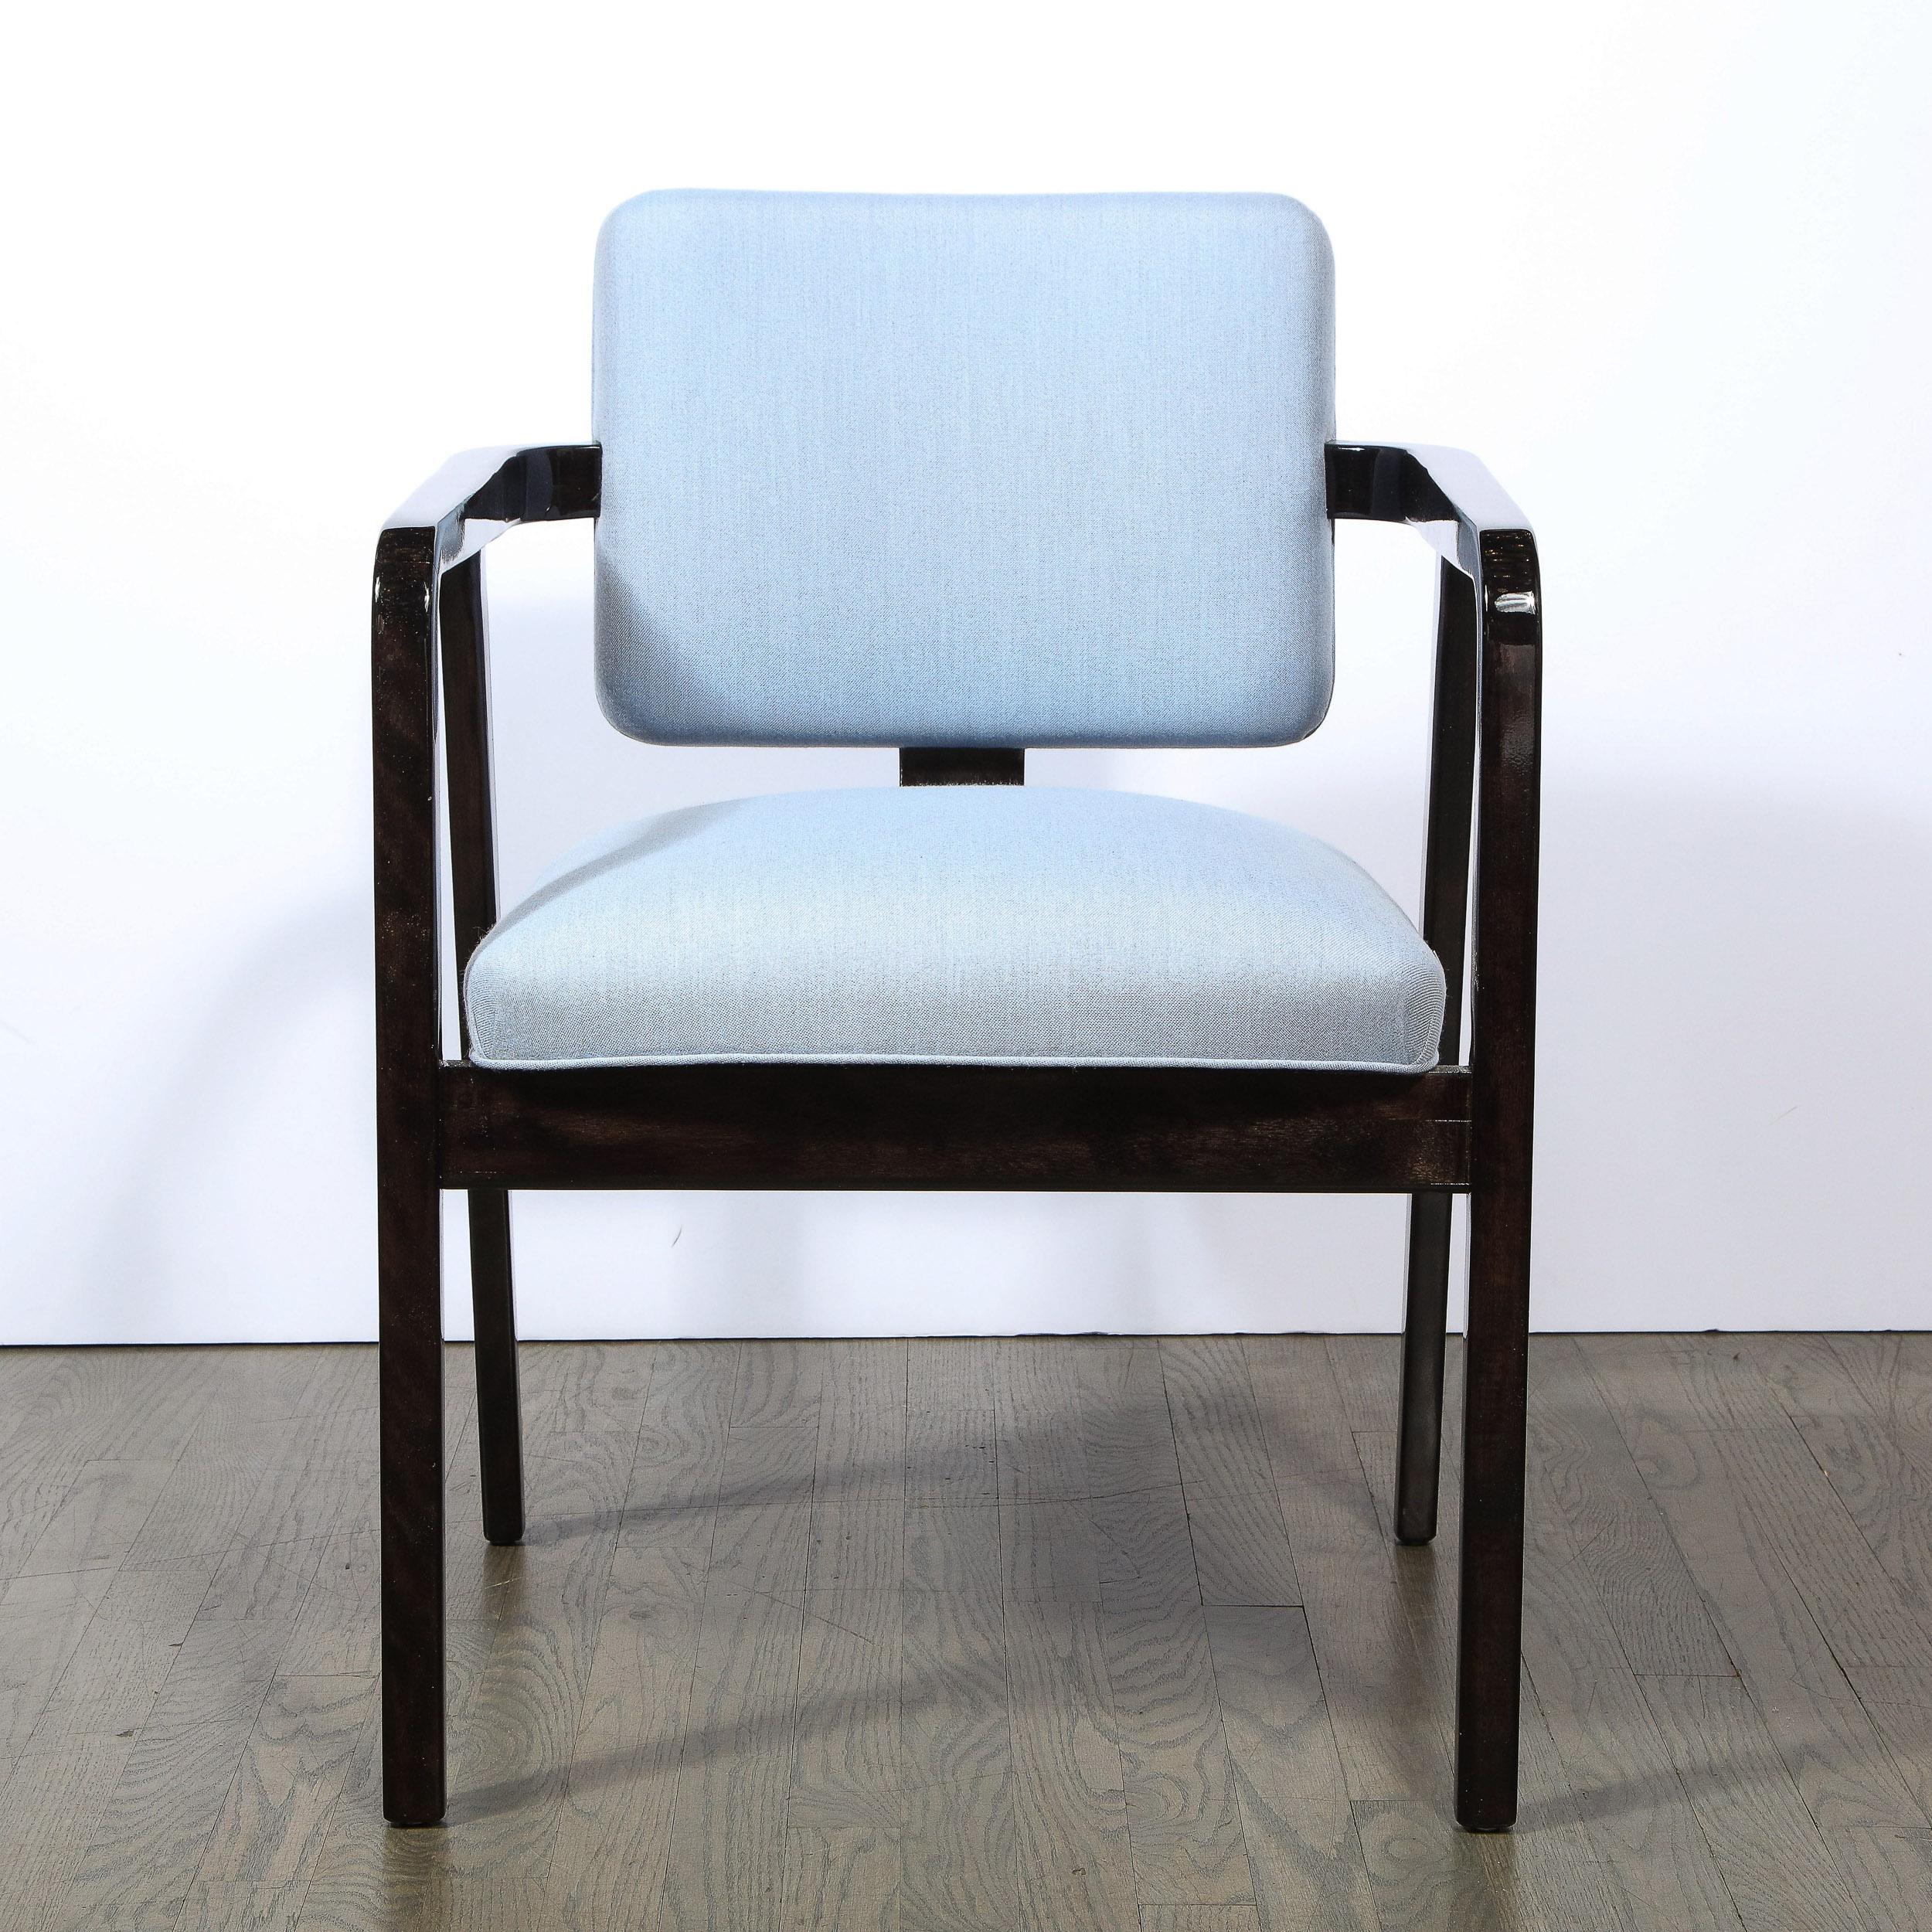 This refined Mid-Century Modern arm/ side chair was designed by the illustrious George Nelson for Herman Miller circa 1950. It offers an angular frame with an arm rest that curves downwards to seamless create the front legs, while the hind legs also